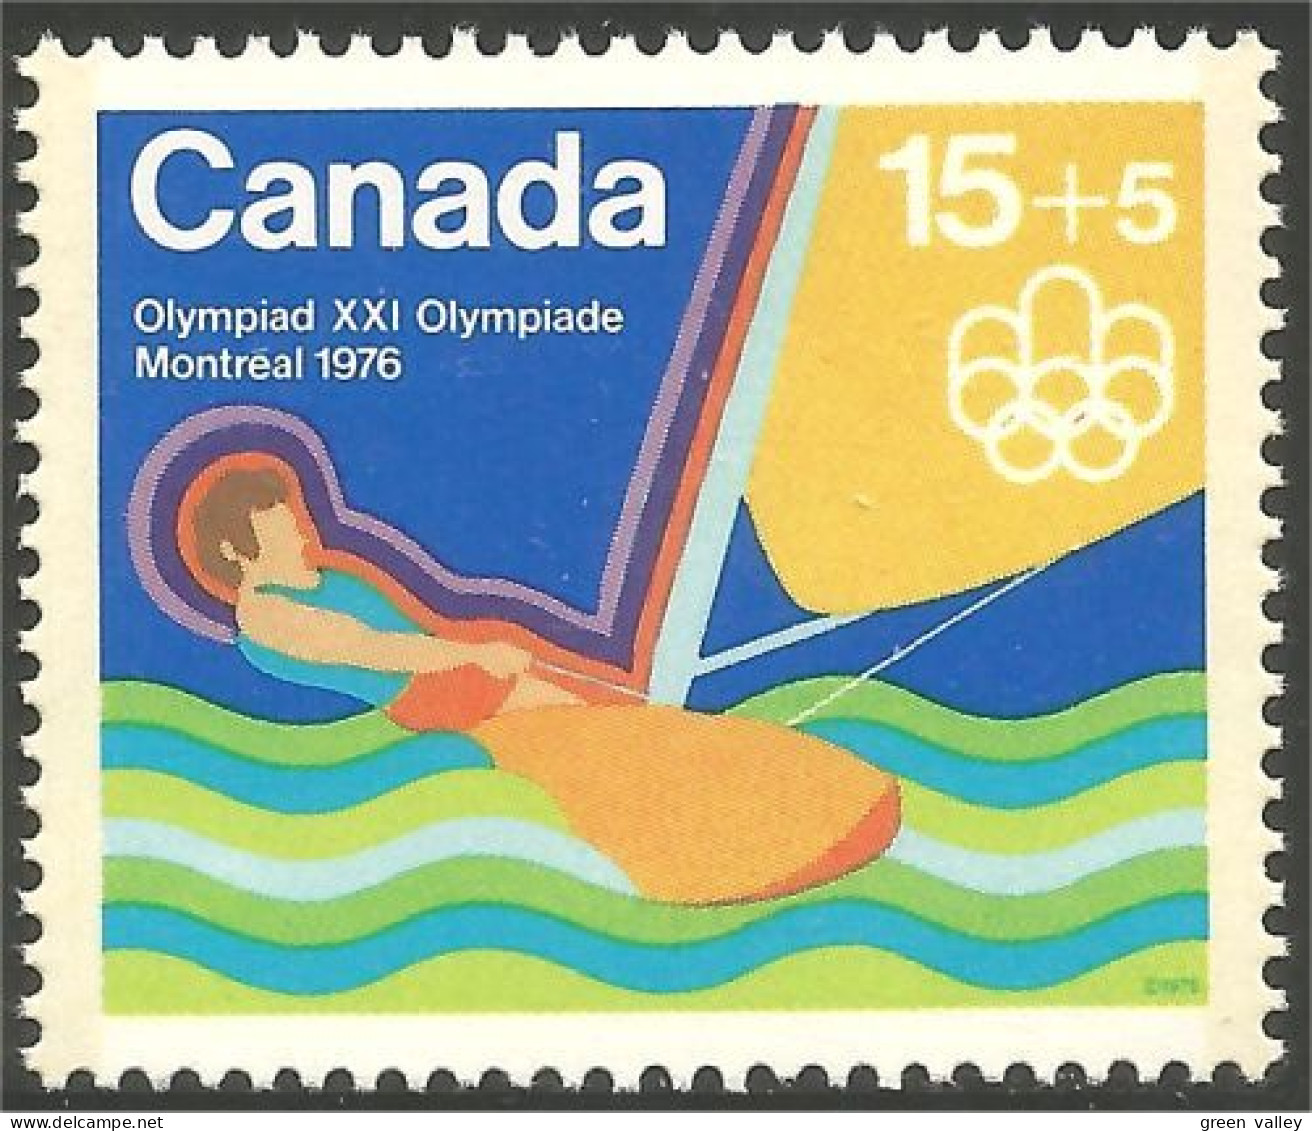 Canada 15c+5c Voile Sailing Jeux Olympiques Montreal 1976 Olympic Games MNH ** Neuf SC (CB-06c) - Verano 1976: Montréal